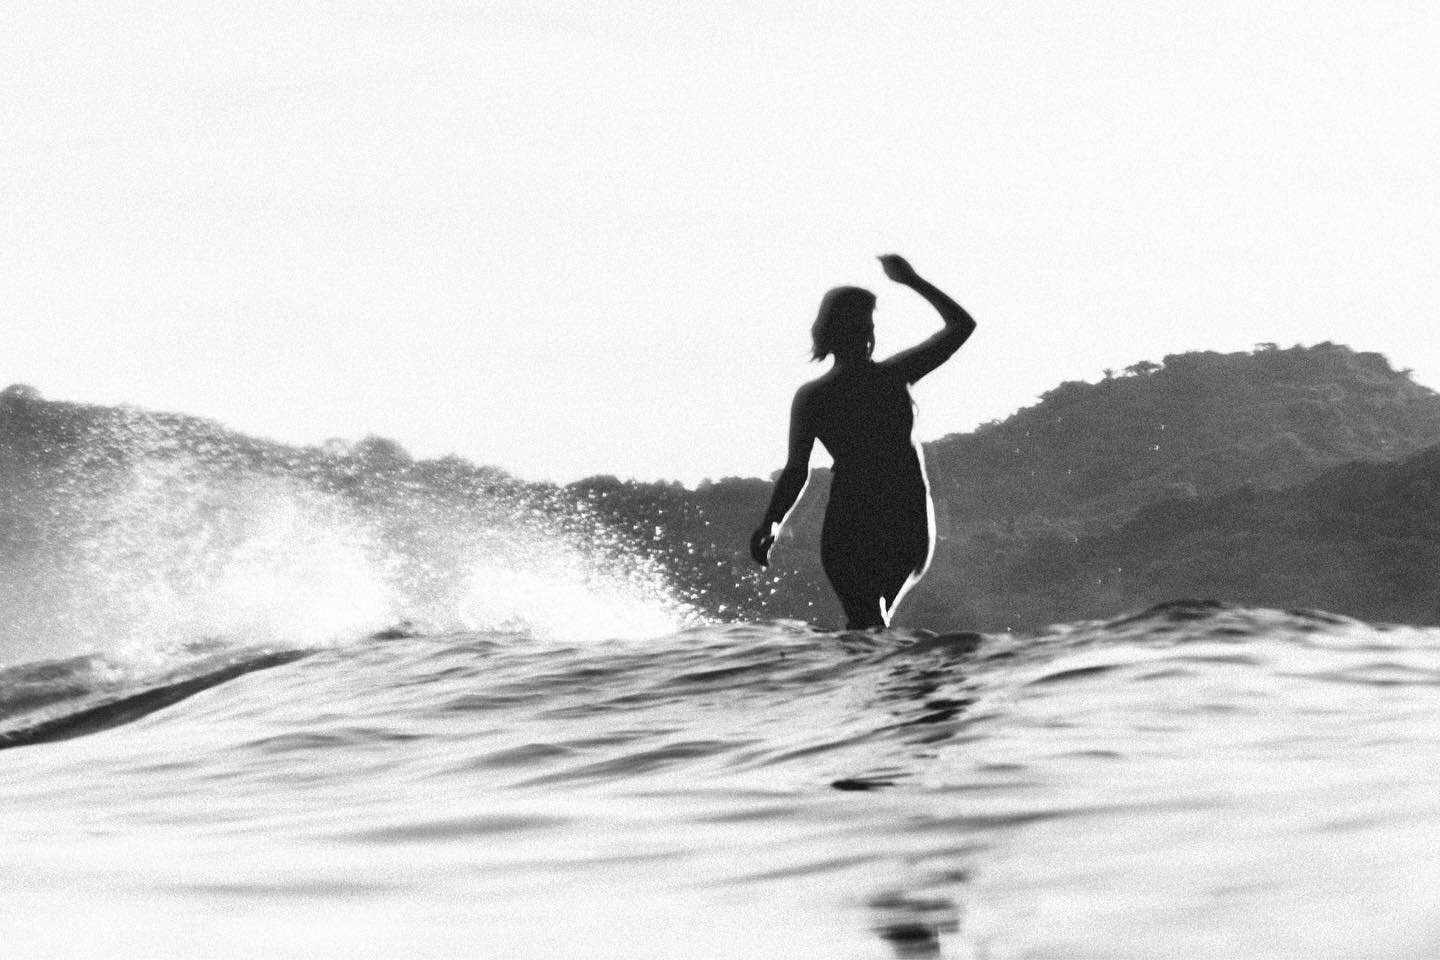 Forever a style queen @mirianventura______________ I took this photo when I first moved to Sayulita, Mexico over 5 years ago. It was the first time I&rsquo;d seen Mirian surf. And now I can&rsquo;t take my camera off her all these years later haha.

